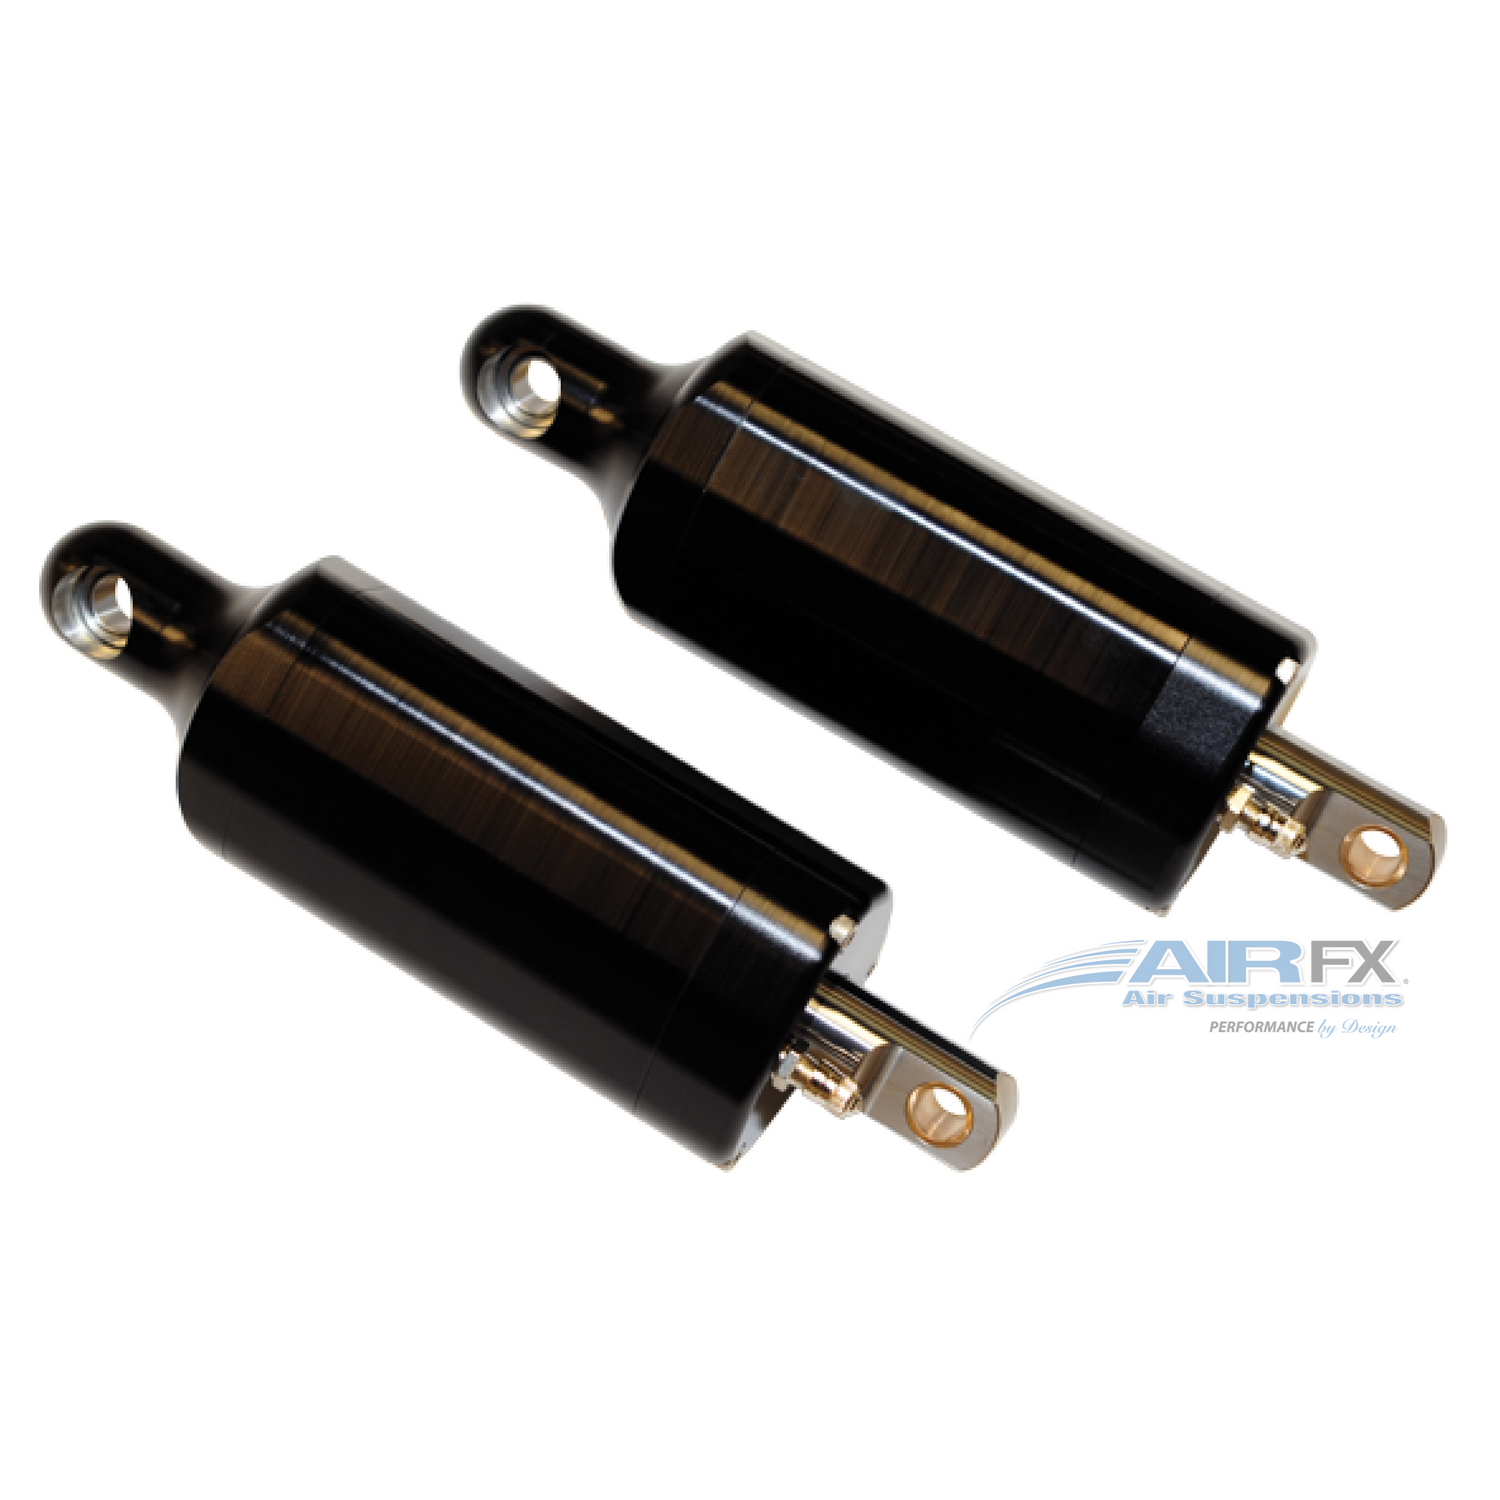 Rear magnum shock pair with black hardcoat finish, 4" stroke, 9.25”-13.25” pin to pin travel. Fits 2000-2008 Harley FL/Touring Models with modified rear fender 2009-2018 Harley FL/Touring Models (FXA-2009-B-S) [+$1,980.00]